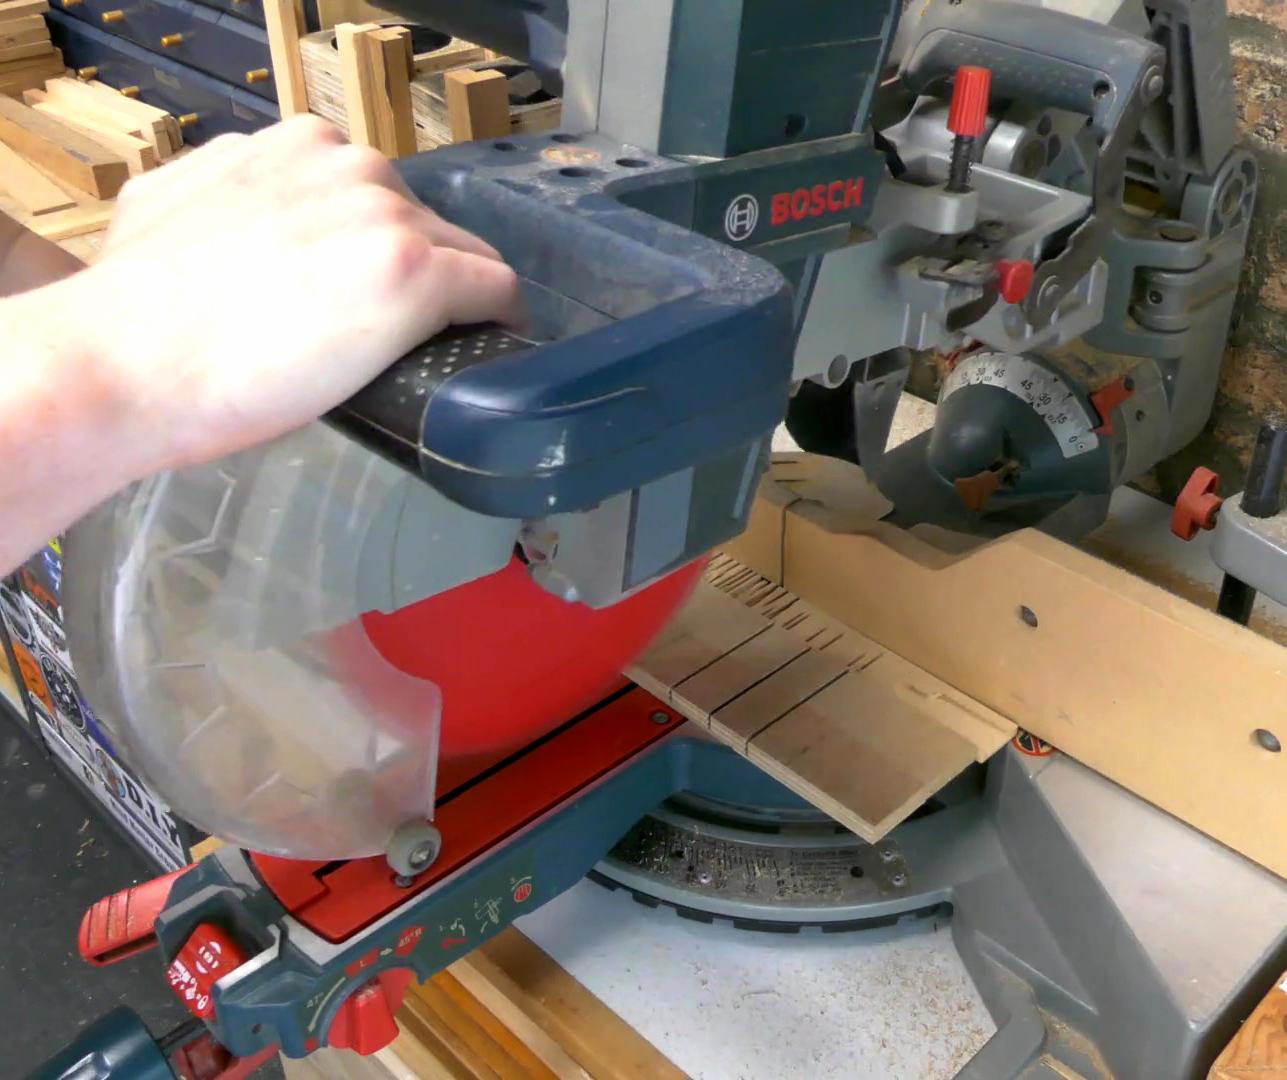 07 - Trenching the Kerfs on the Sliding Mitre Saw Using the Depth Stop Setting.jpg